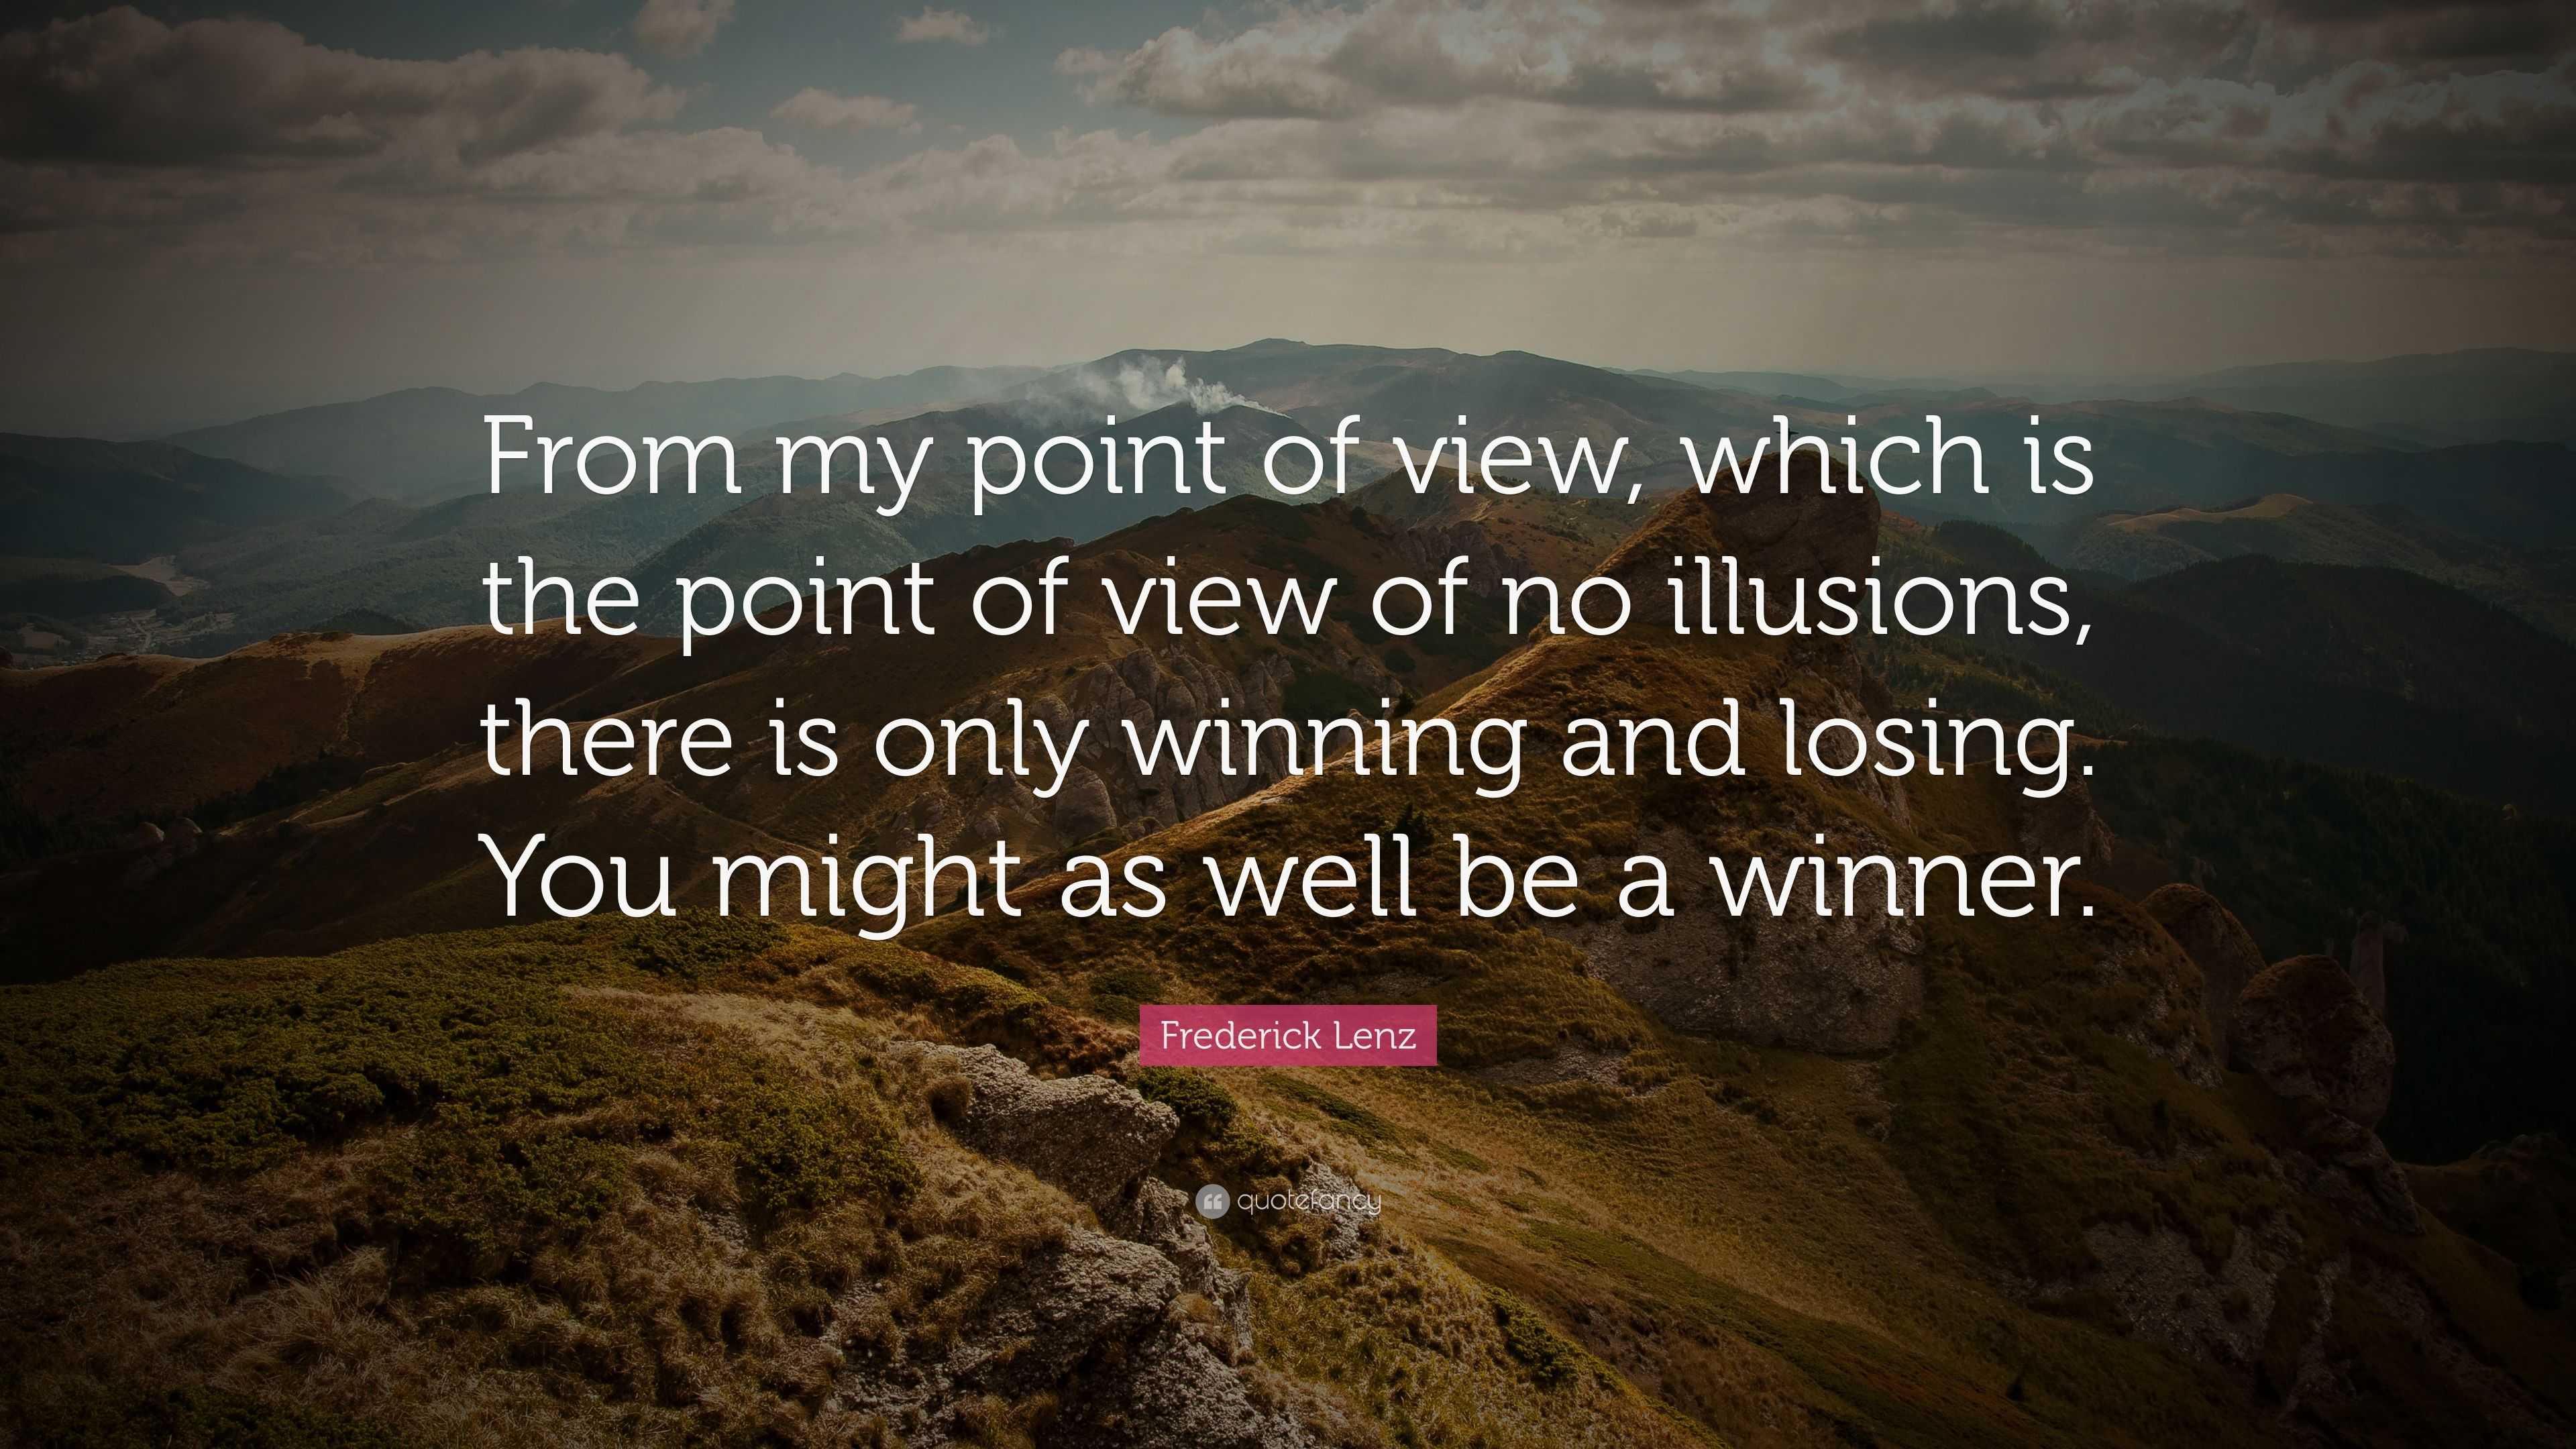 Frederick Lenz Quote “from My Point Of View Which Is The Point Of